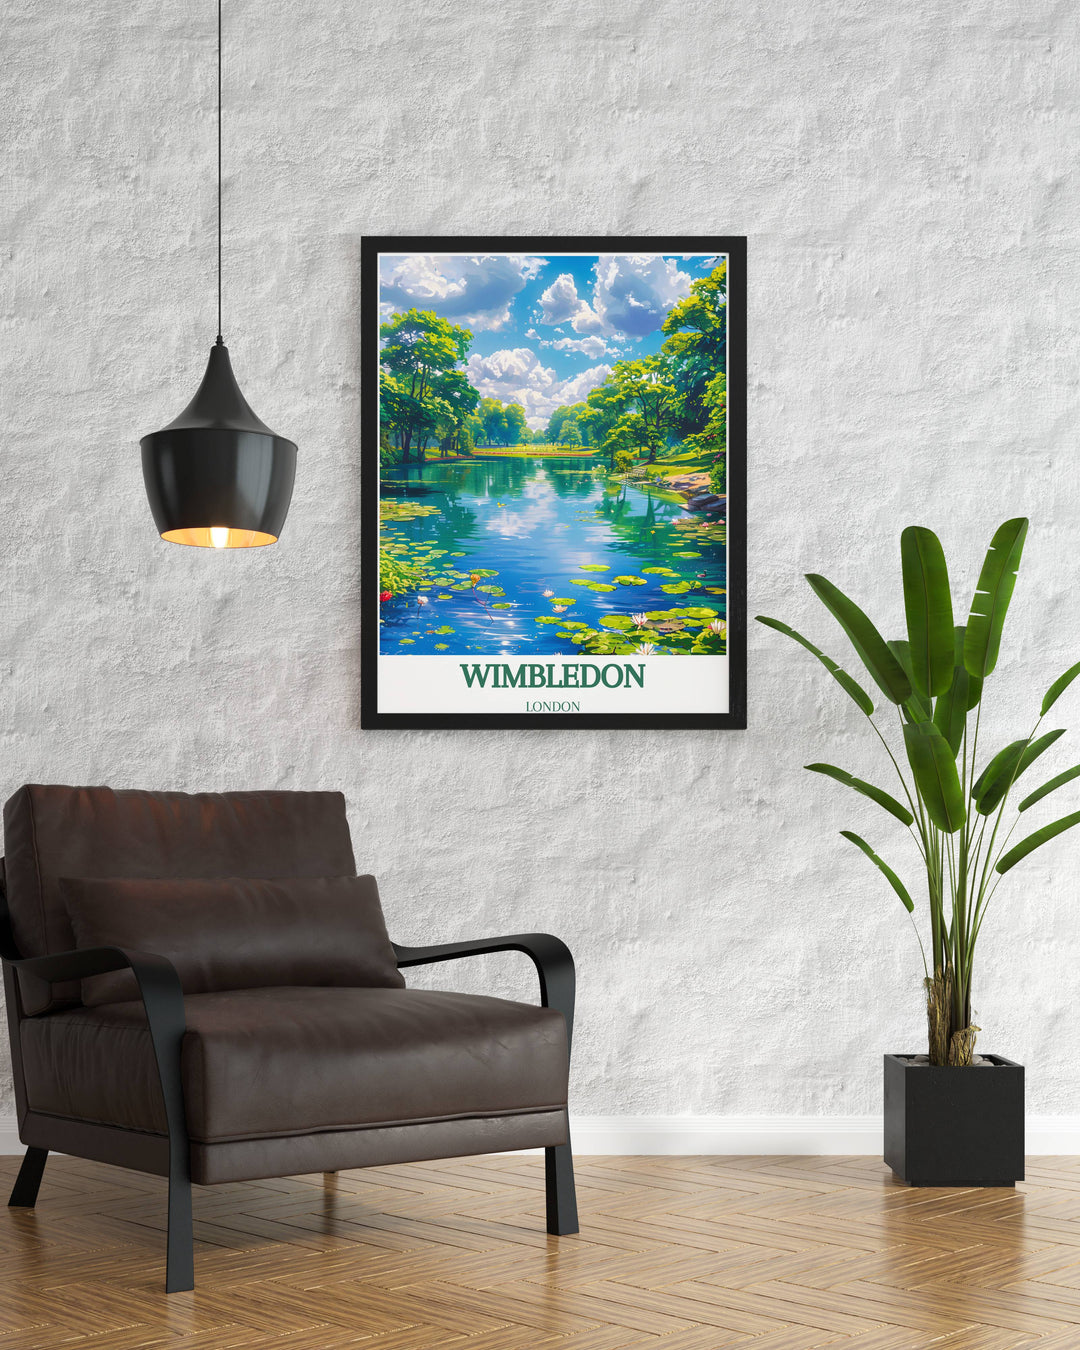 Stunning print of Wimbledon Common in London, highlighting the natural beauty and tranquility of this iconic park, ideal for home or office decor.